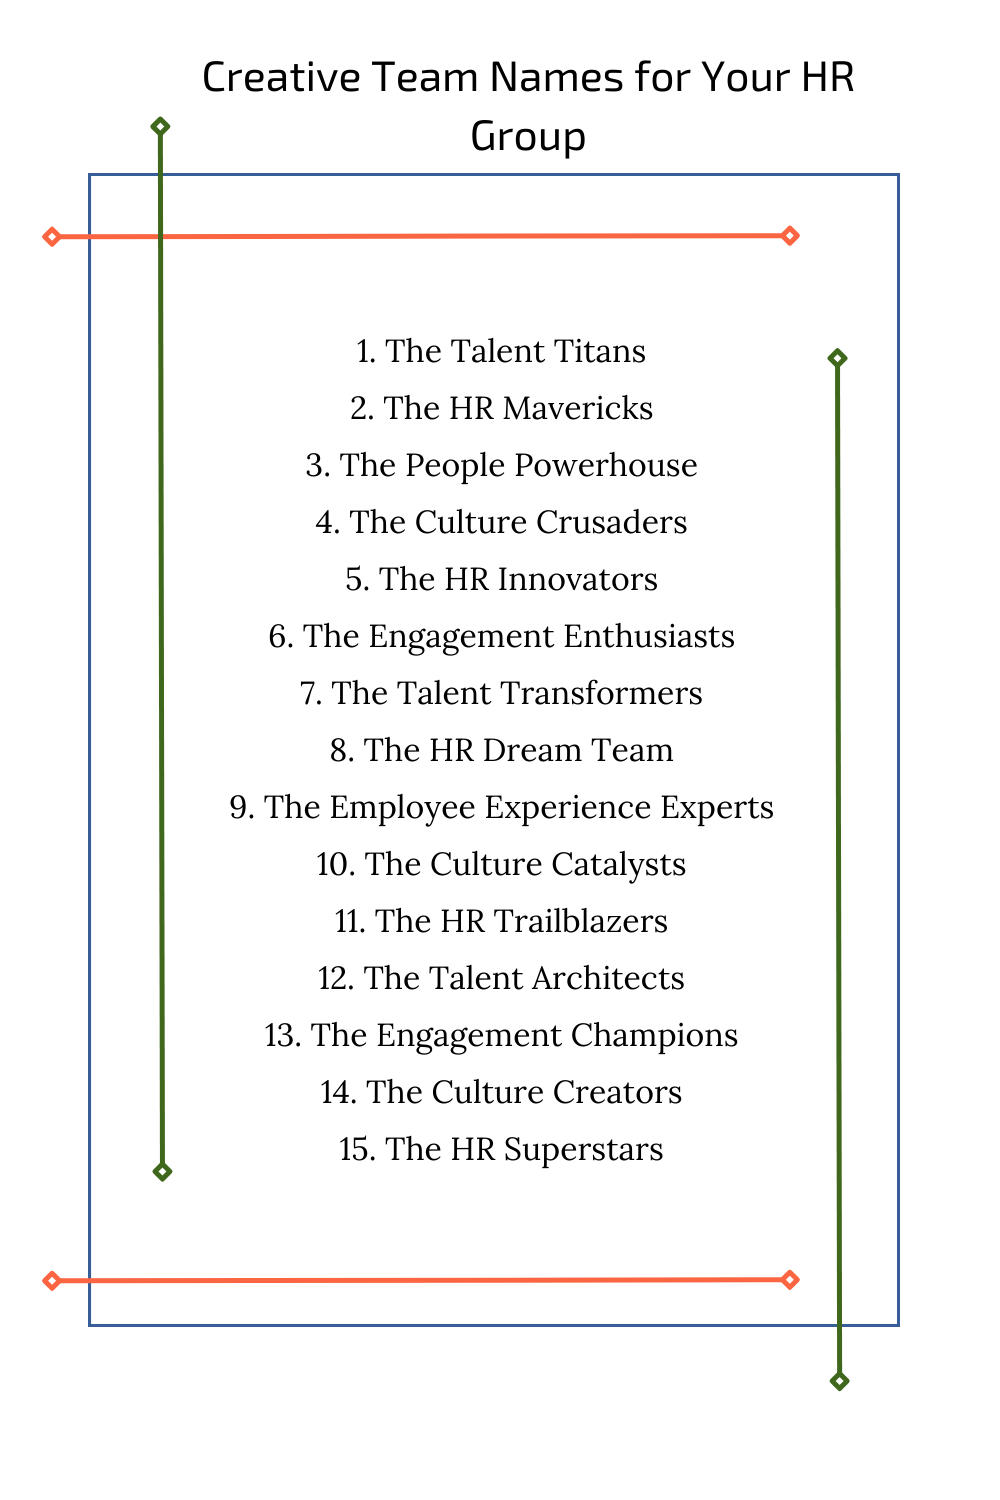 Creative Team Names for Your HR Group